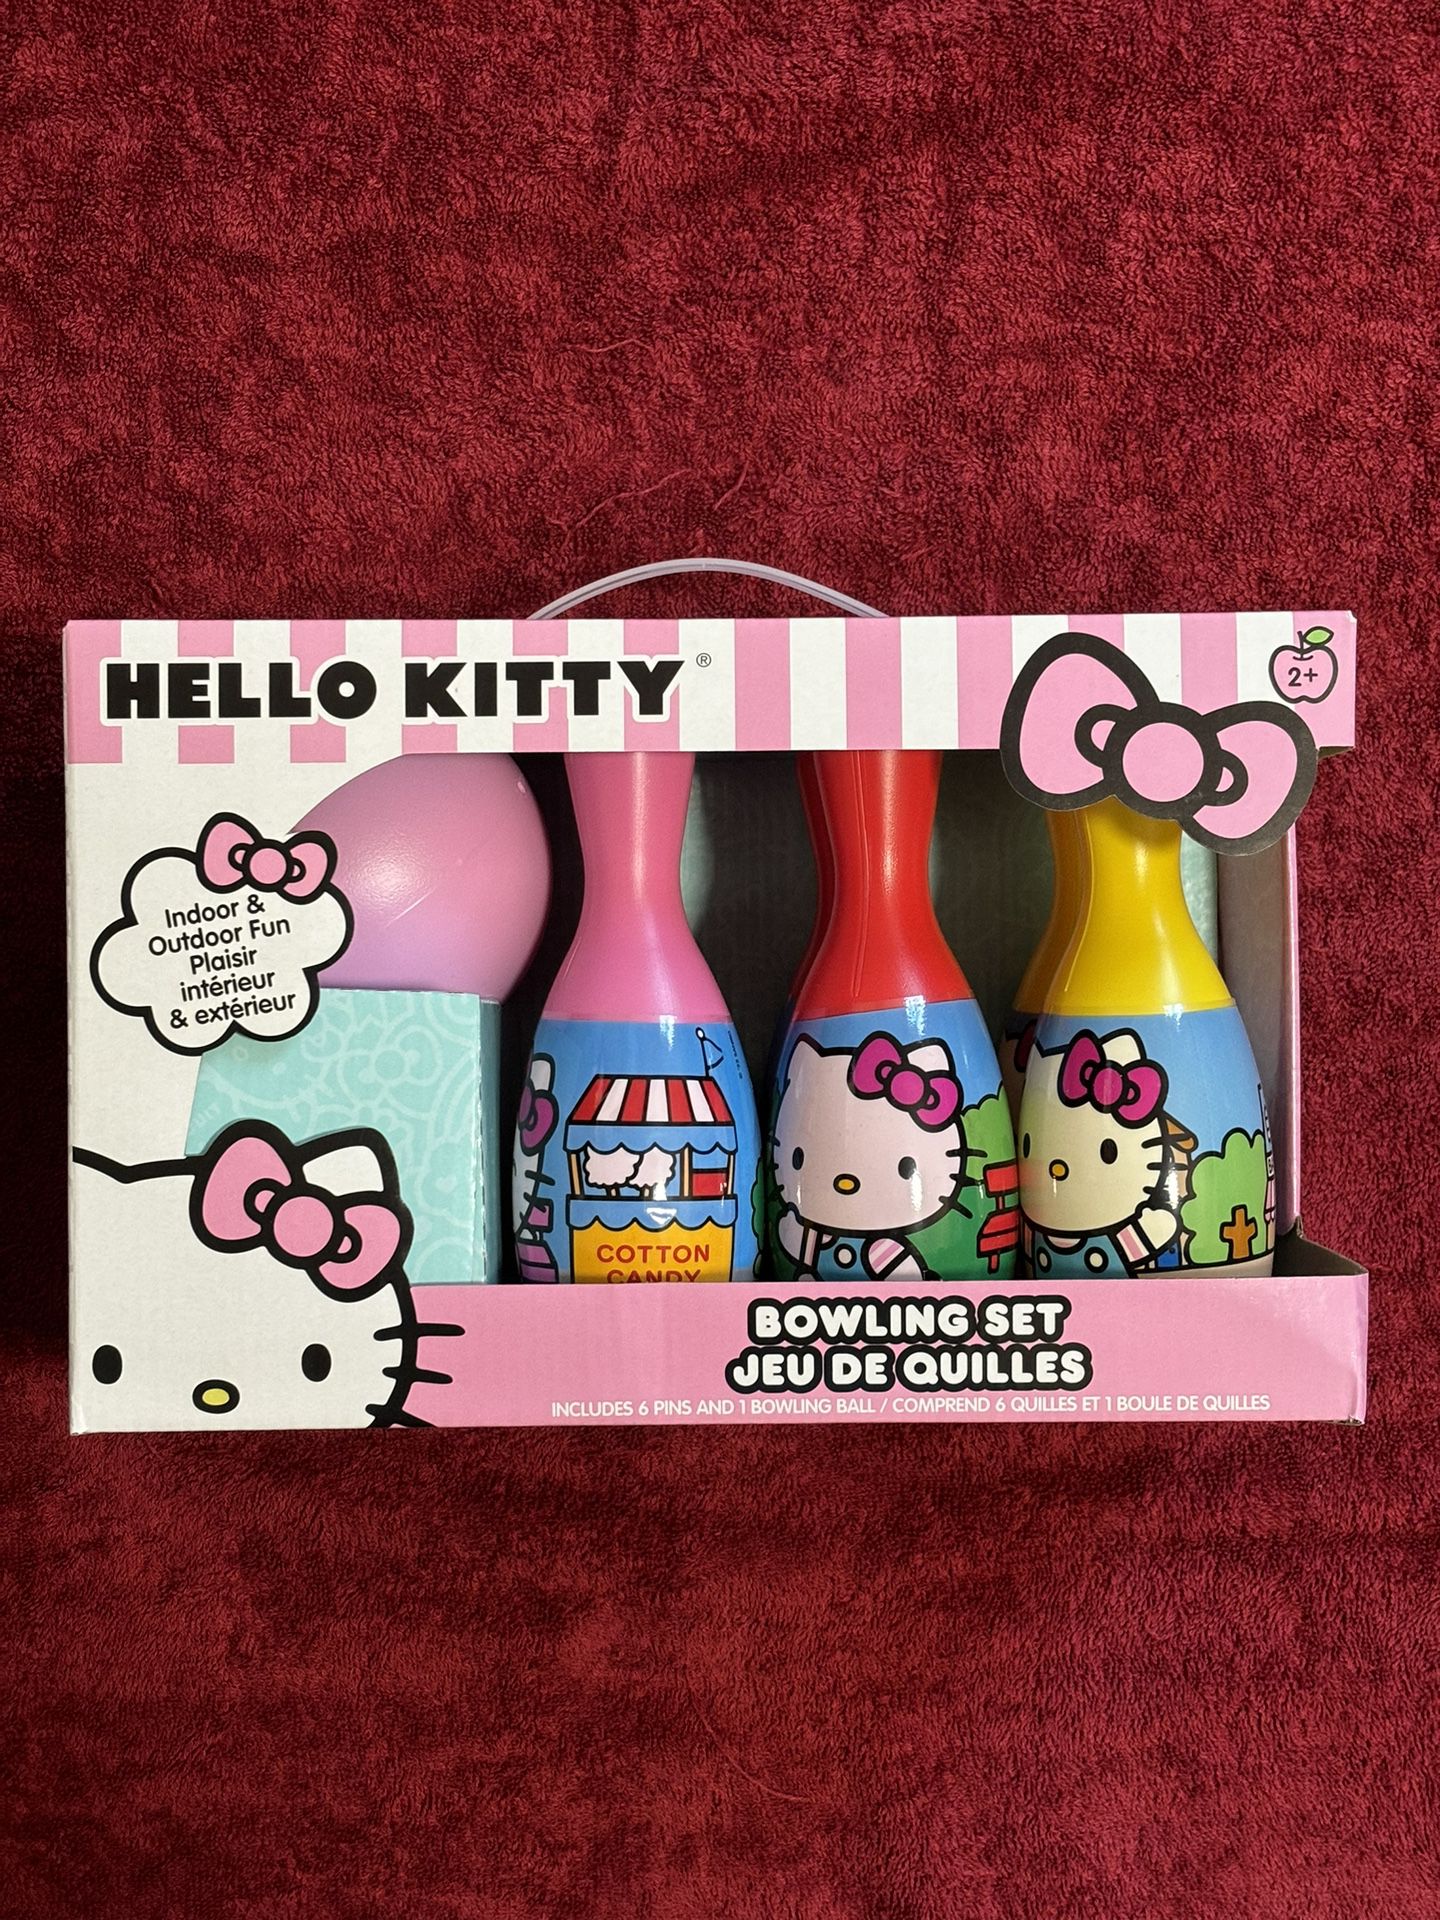 Sanrio Hello Kitty Indoor/Outdoor Bowling Set 6 Pins & 1 Bowling Ball Brand New